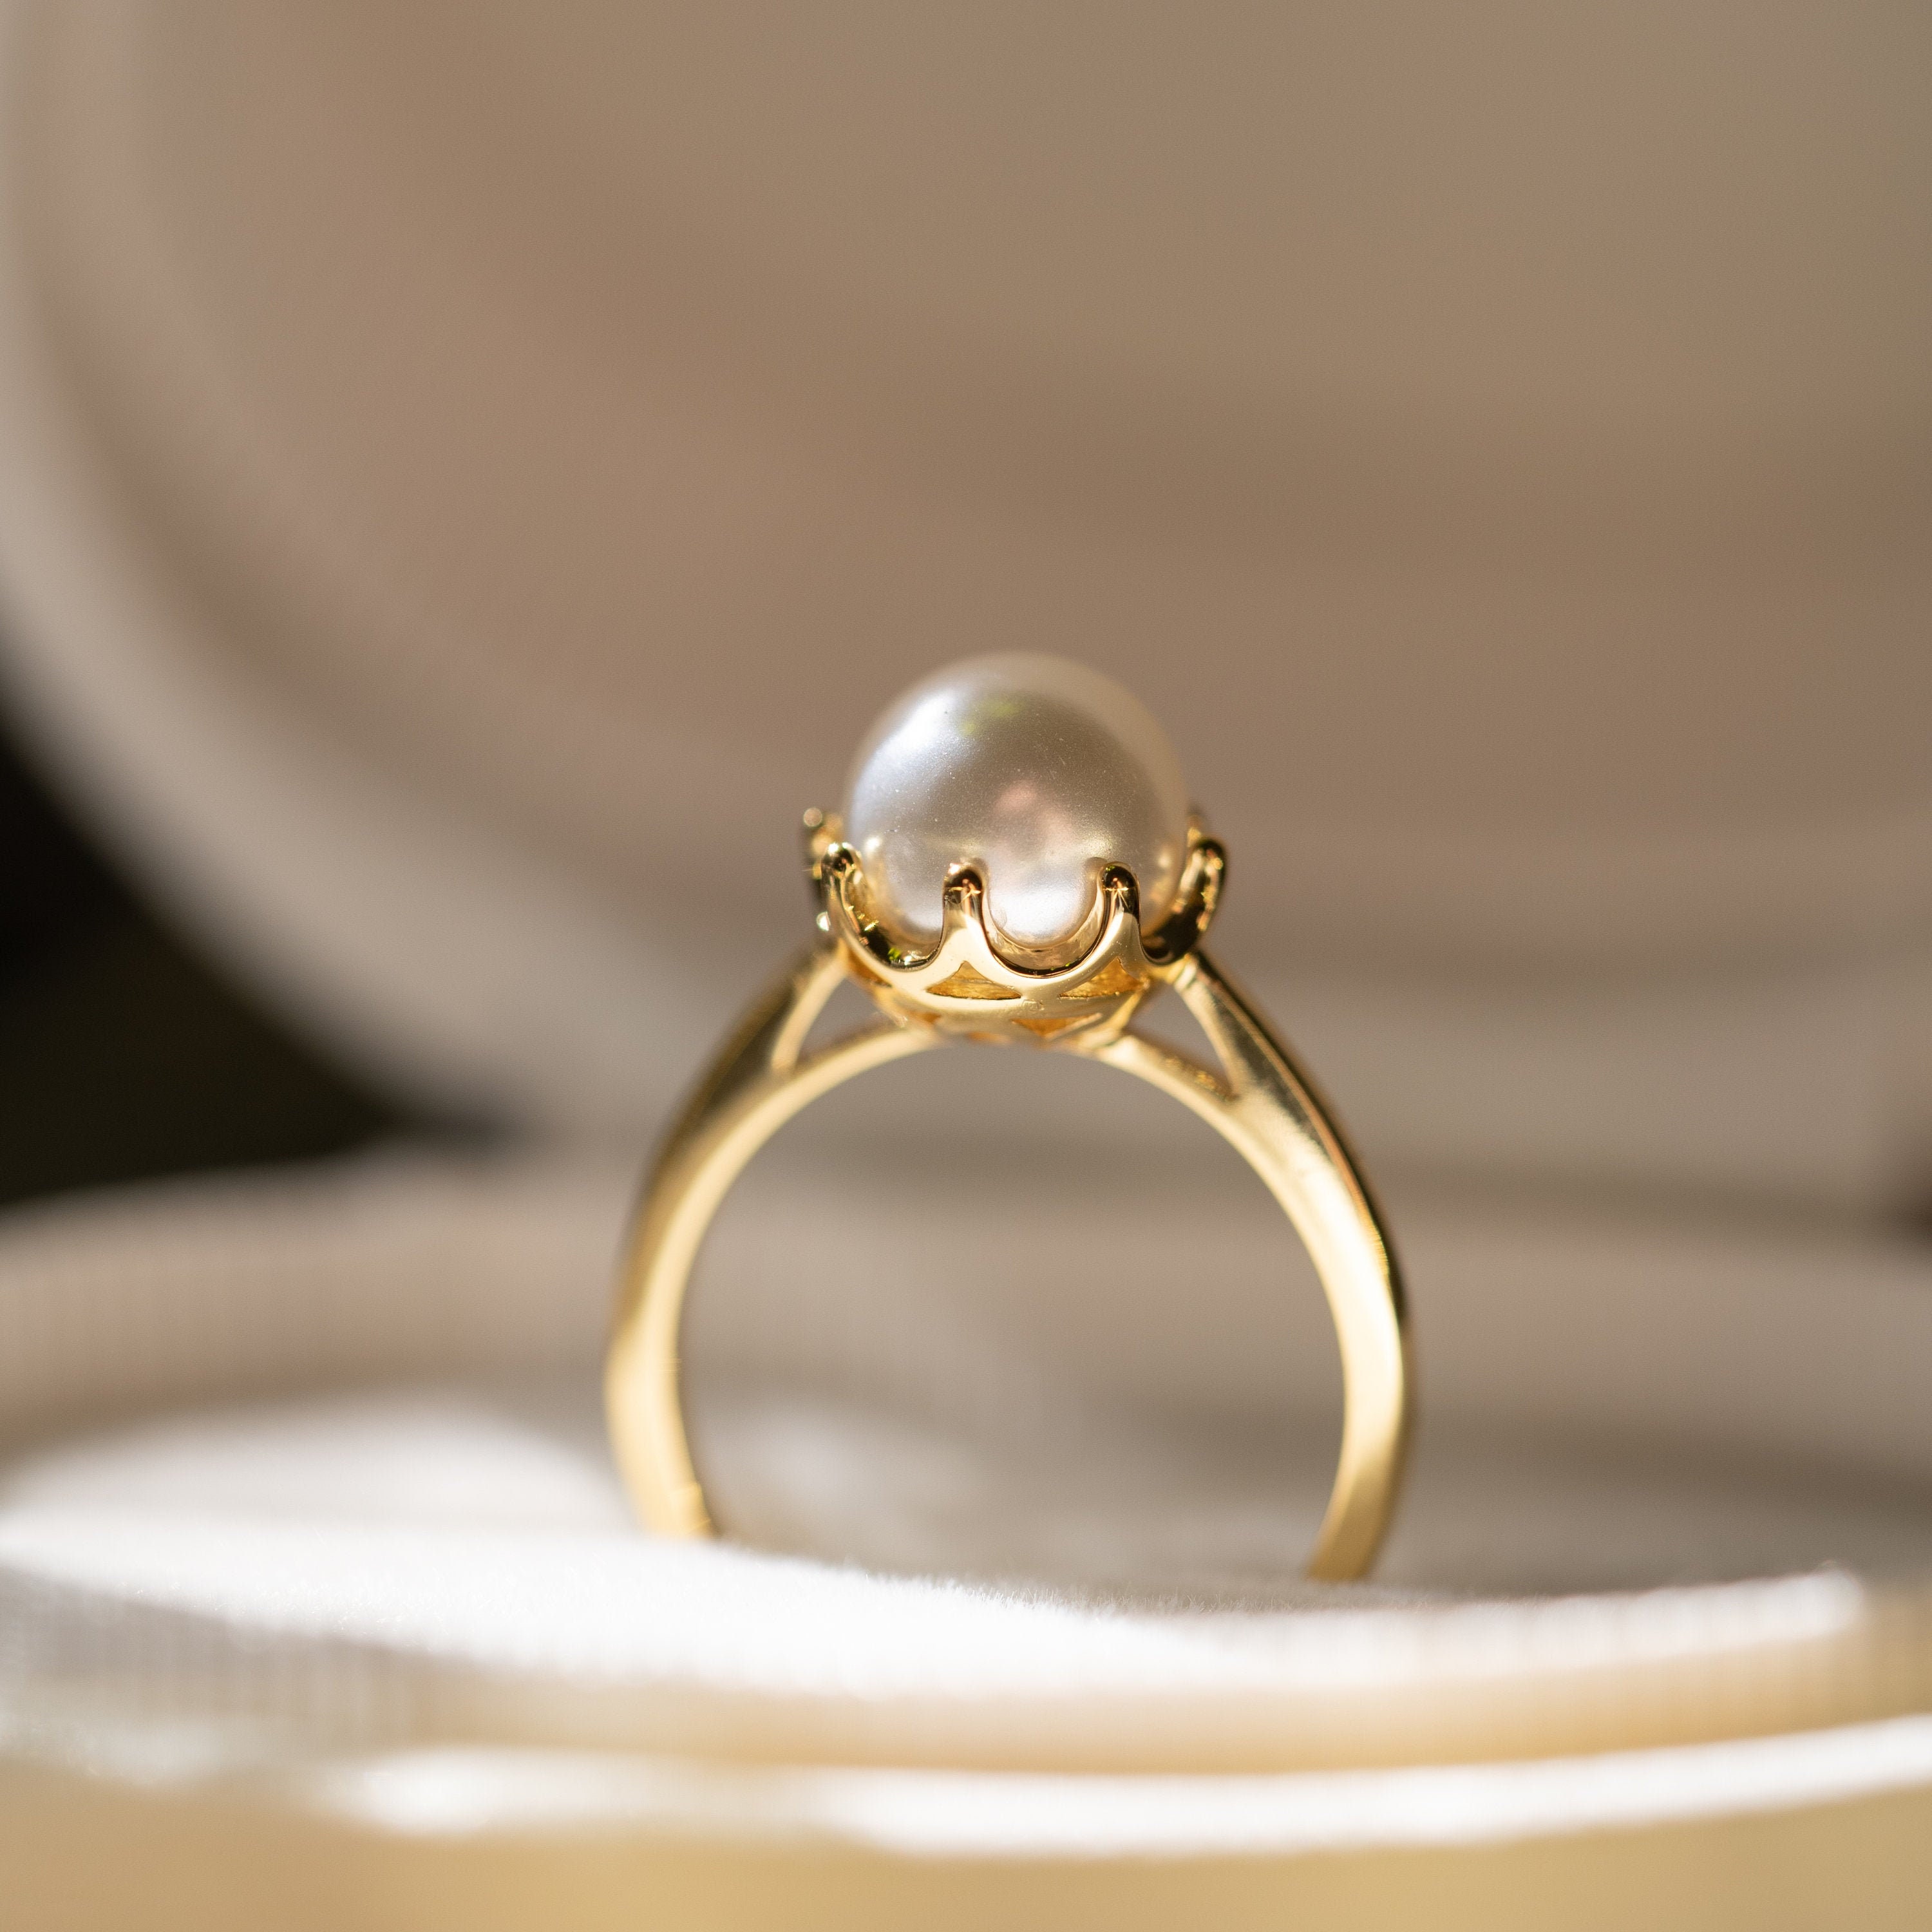 Explore 137+ pearl ring gold latest